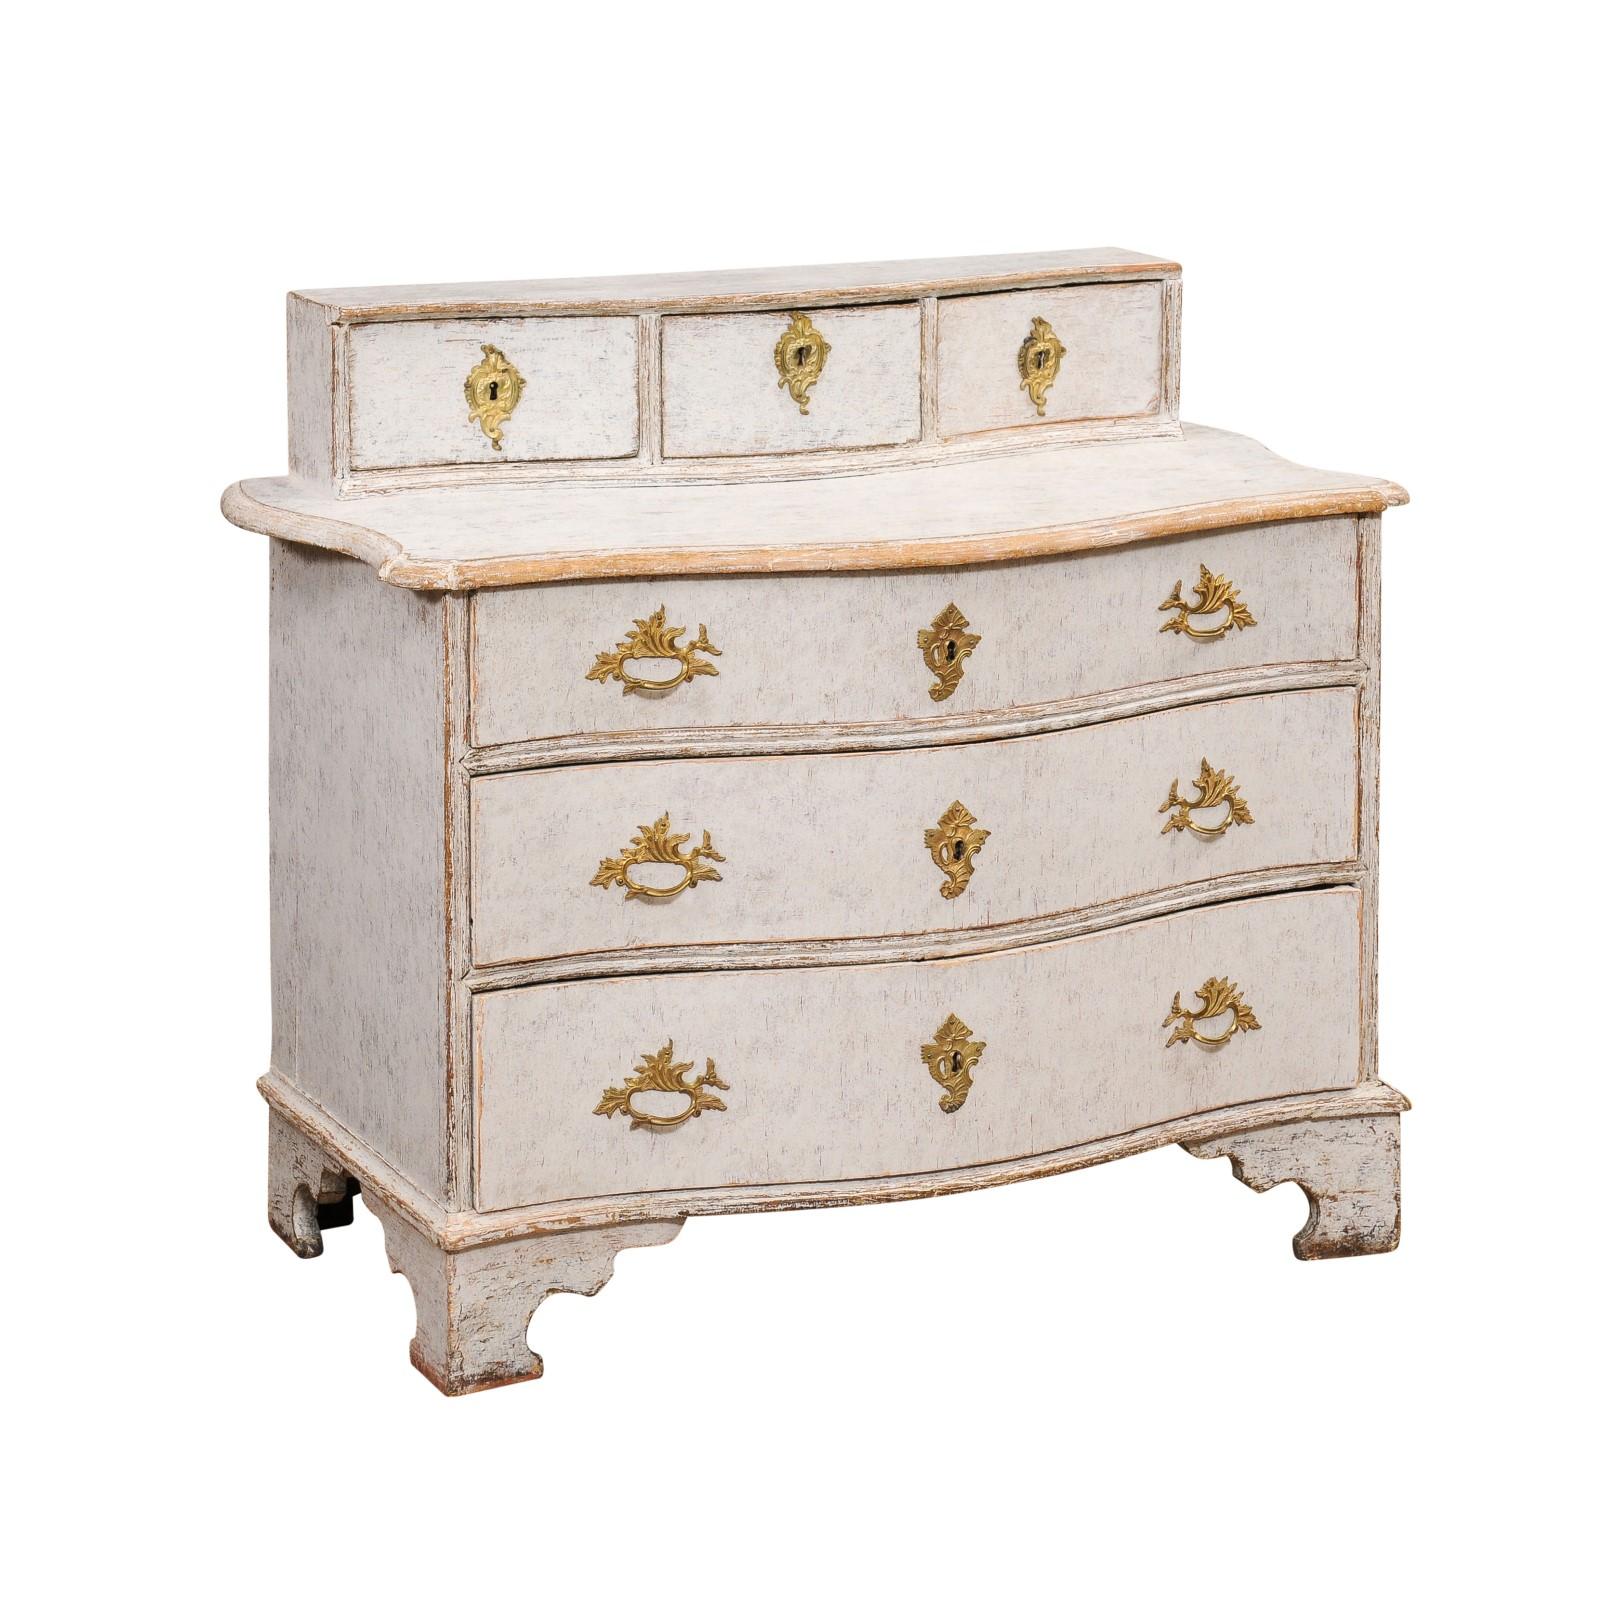 A Swedish Rococo period commode from circa 1760 with light Gustavian gray painted finish, raised shelf on the top, three drawers and bronze hardware. Immerse yourself in the grace and sophistication of the Swedish Rococo period with this enchanting